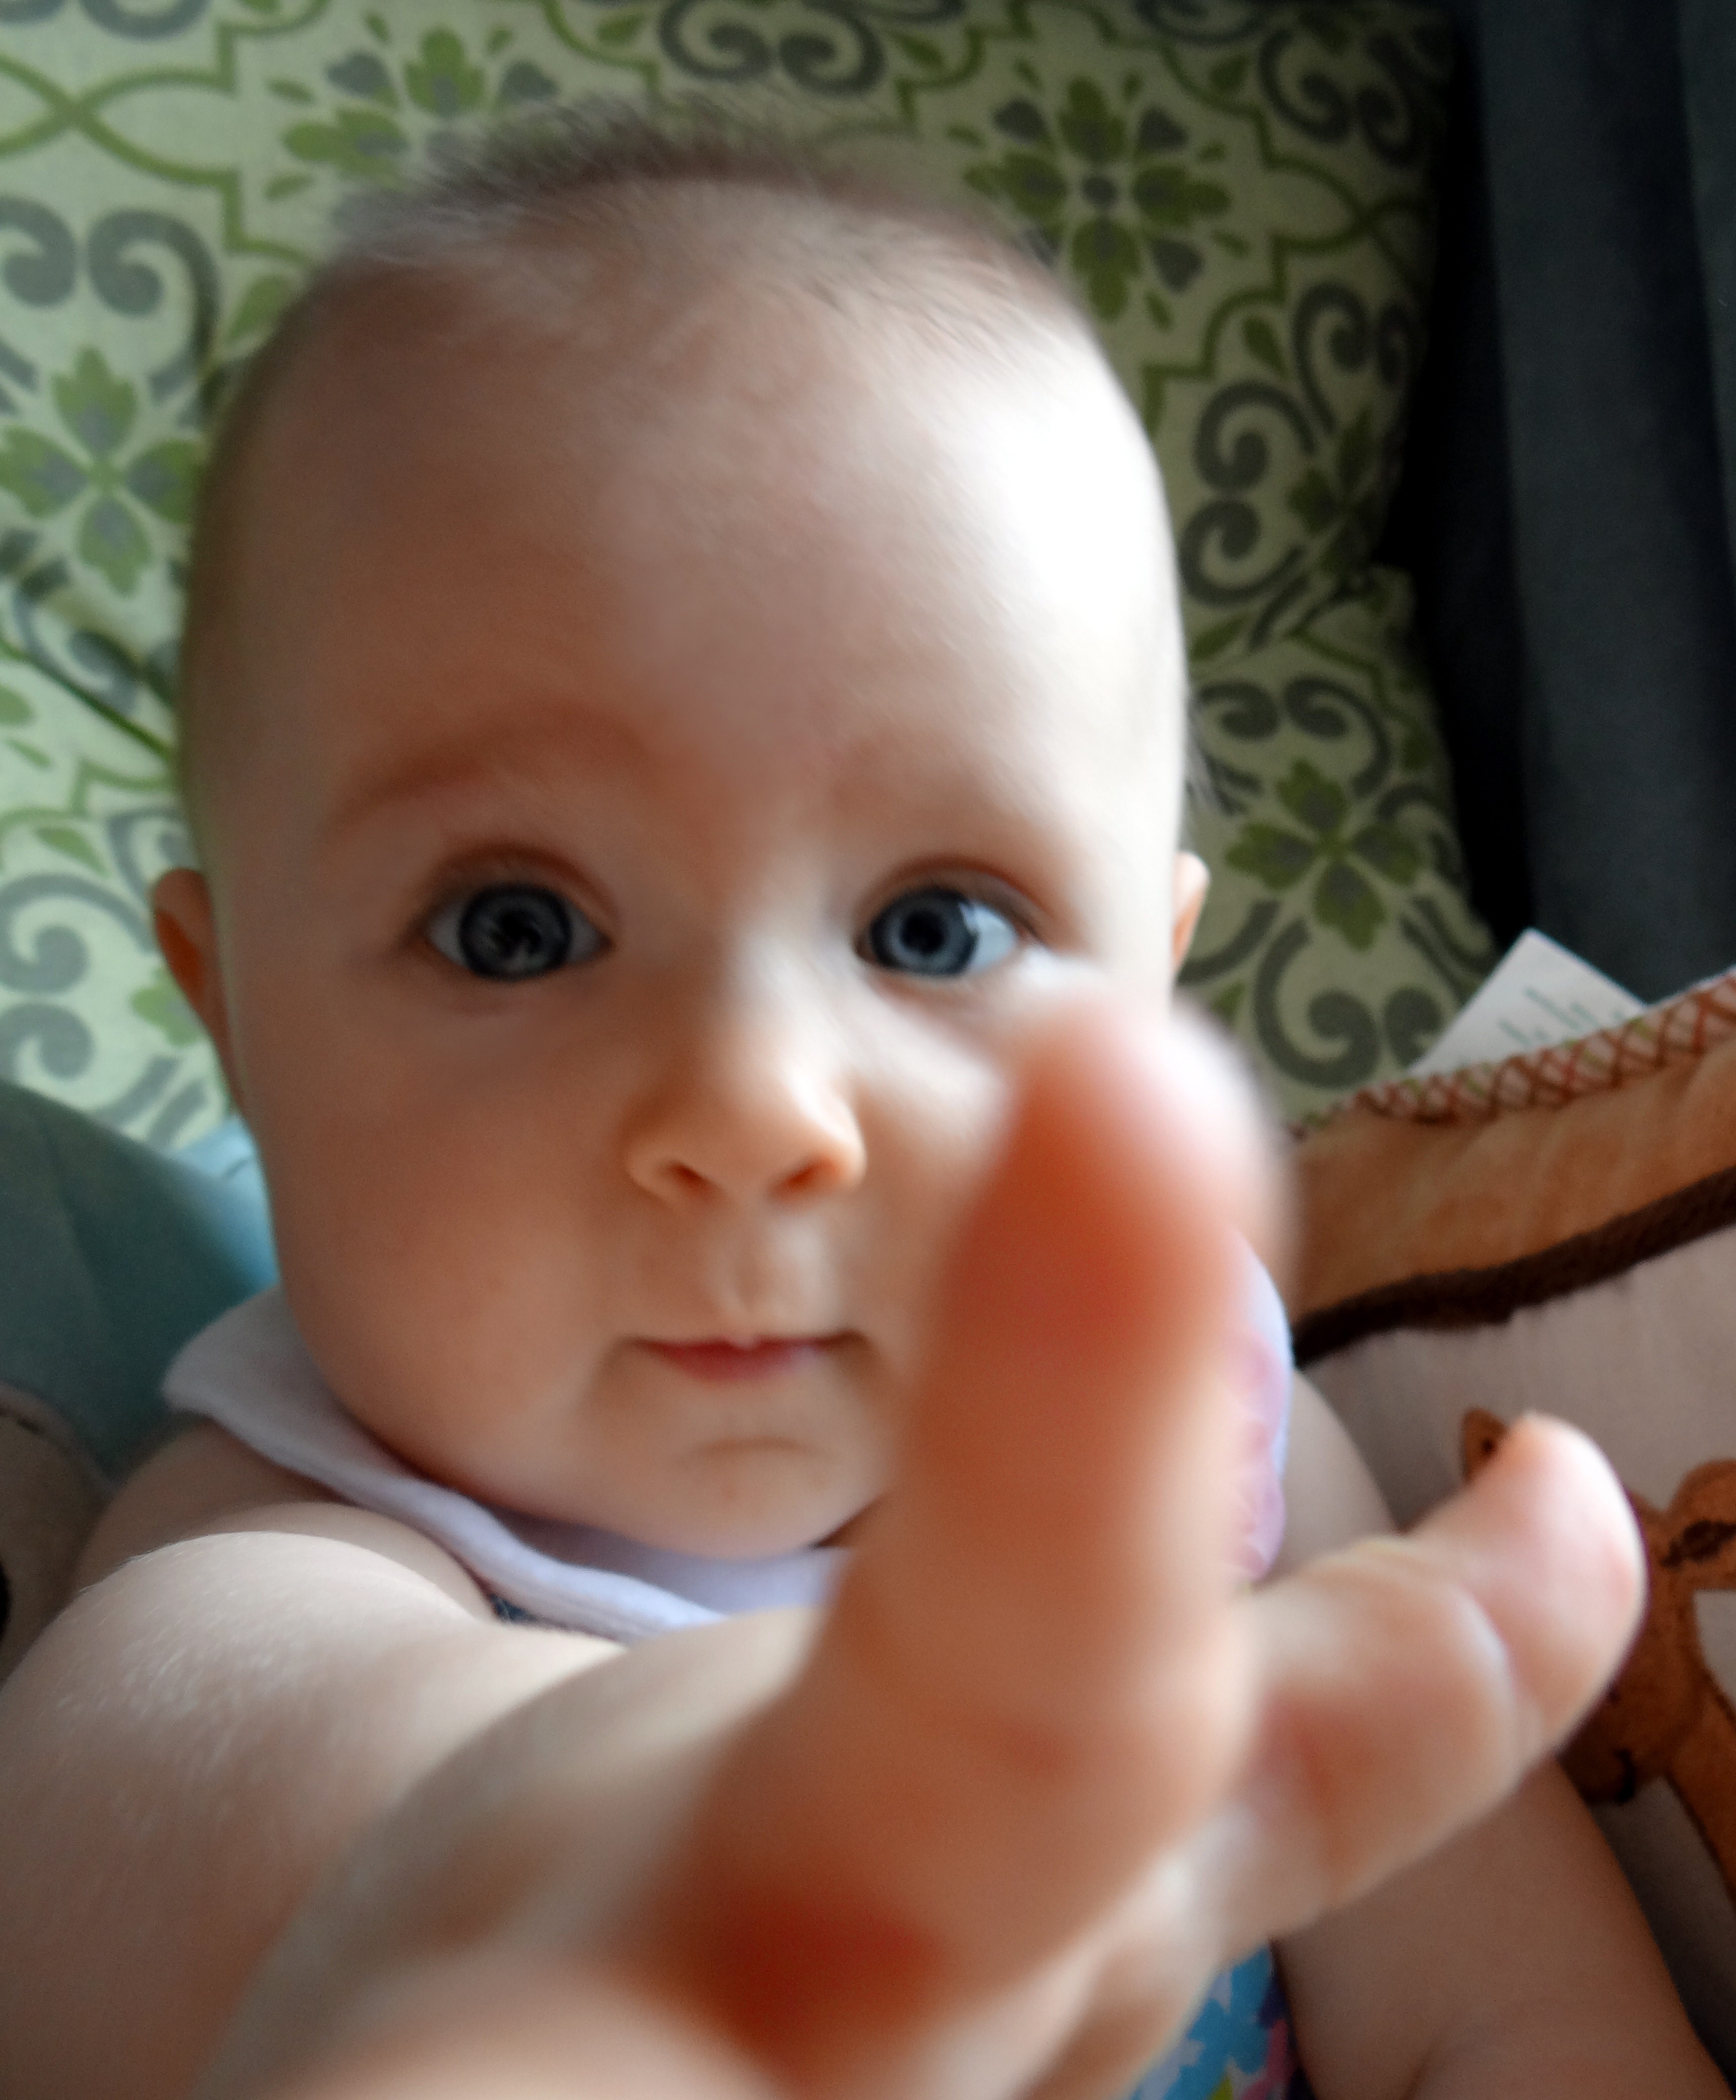 Baby reaching for the camera